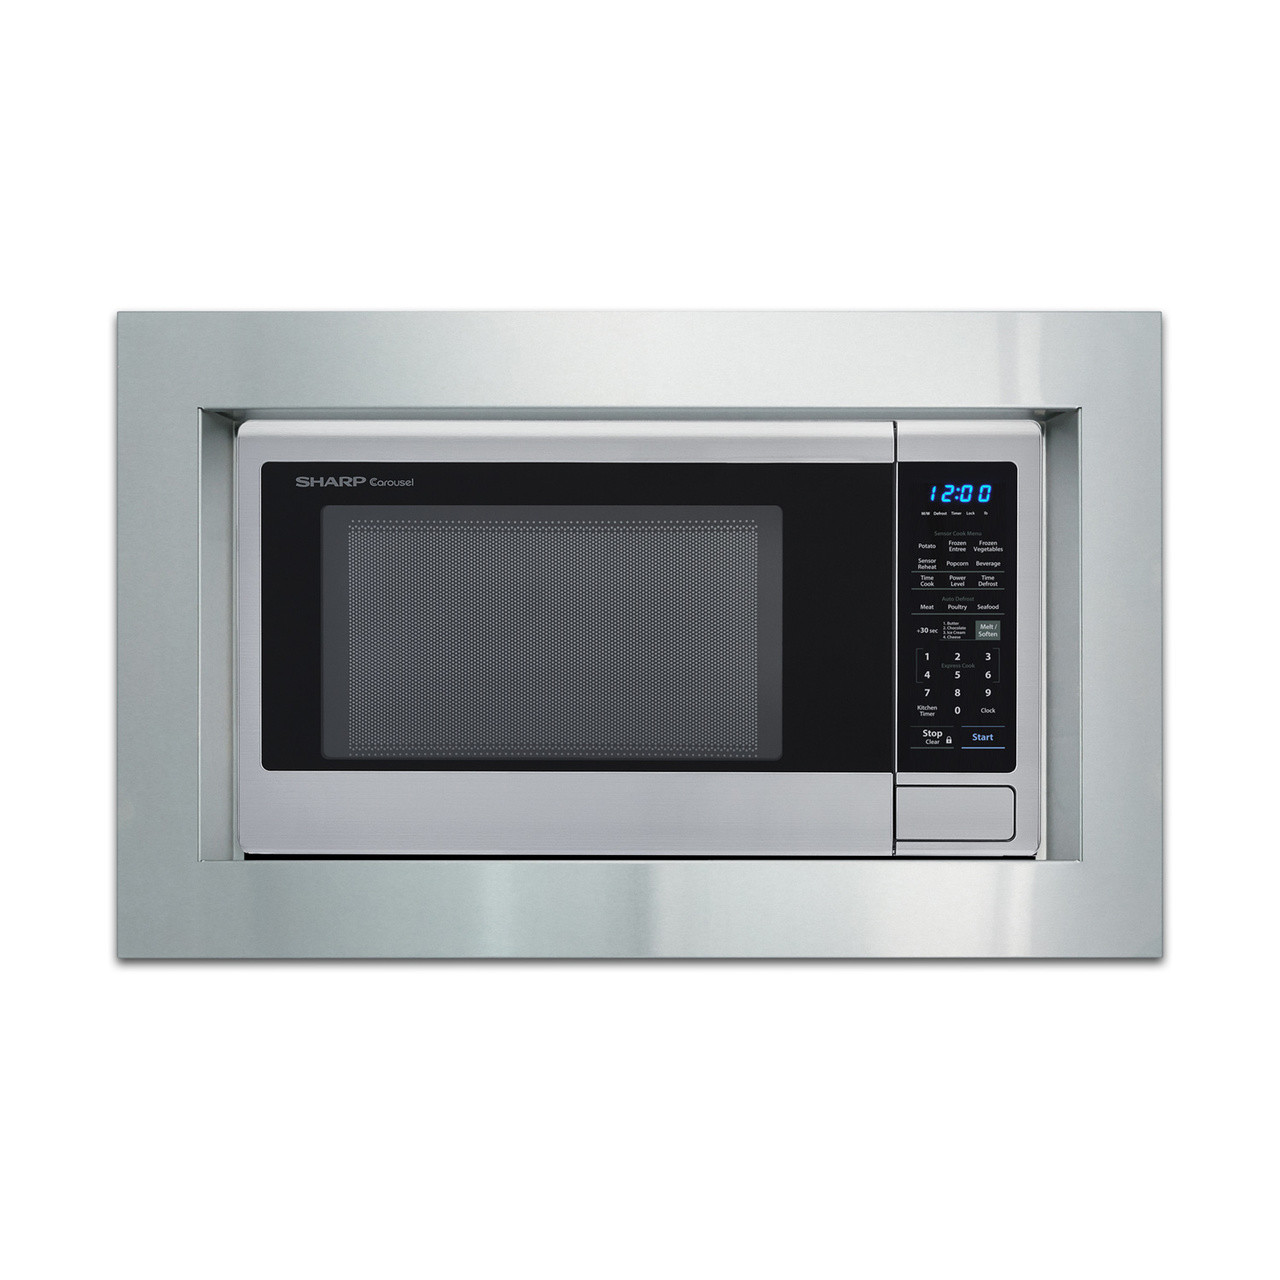 1.8 cu. ft. Sharp Stainless Steel Countertop Microwave (SMC1842CS) – with trim kit